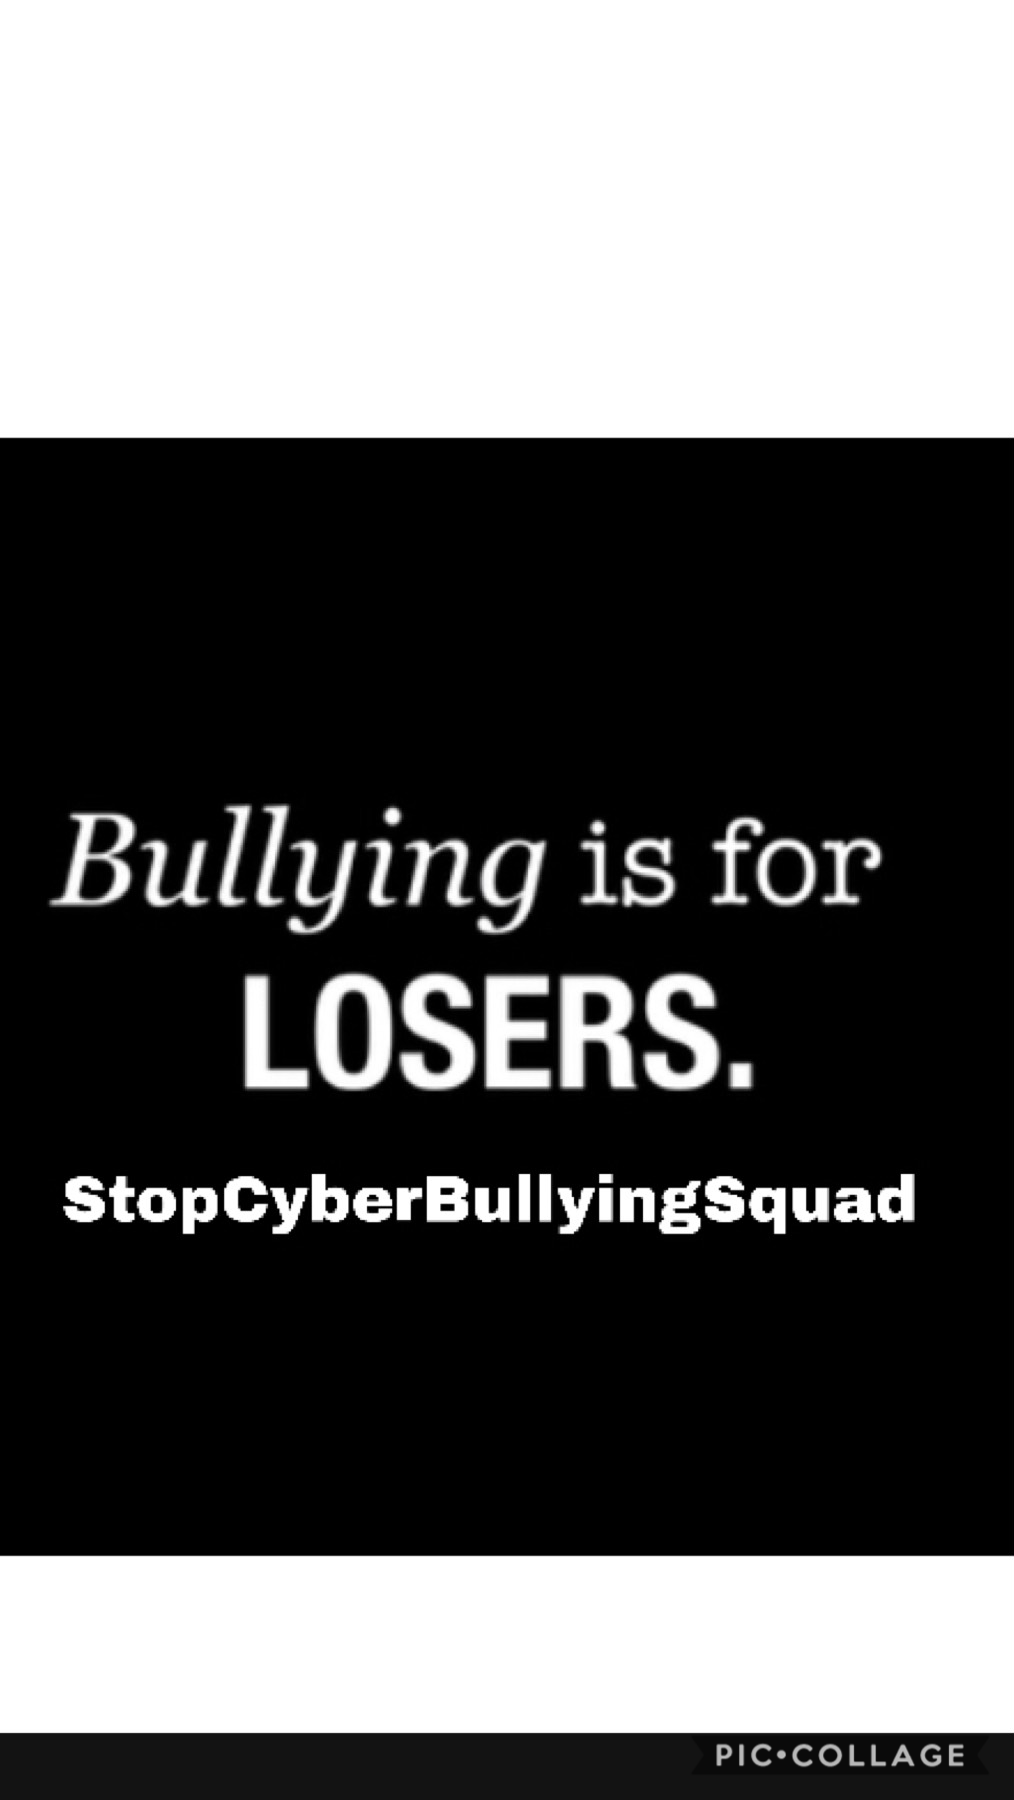 Plz join our squad by commenting #StopCyberBullyingSquad